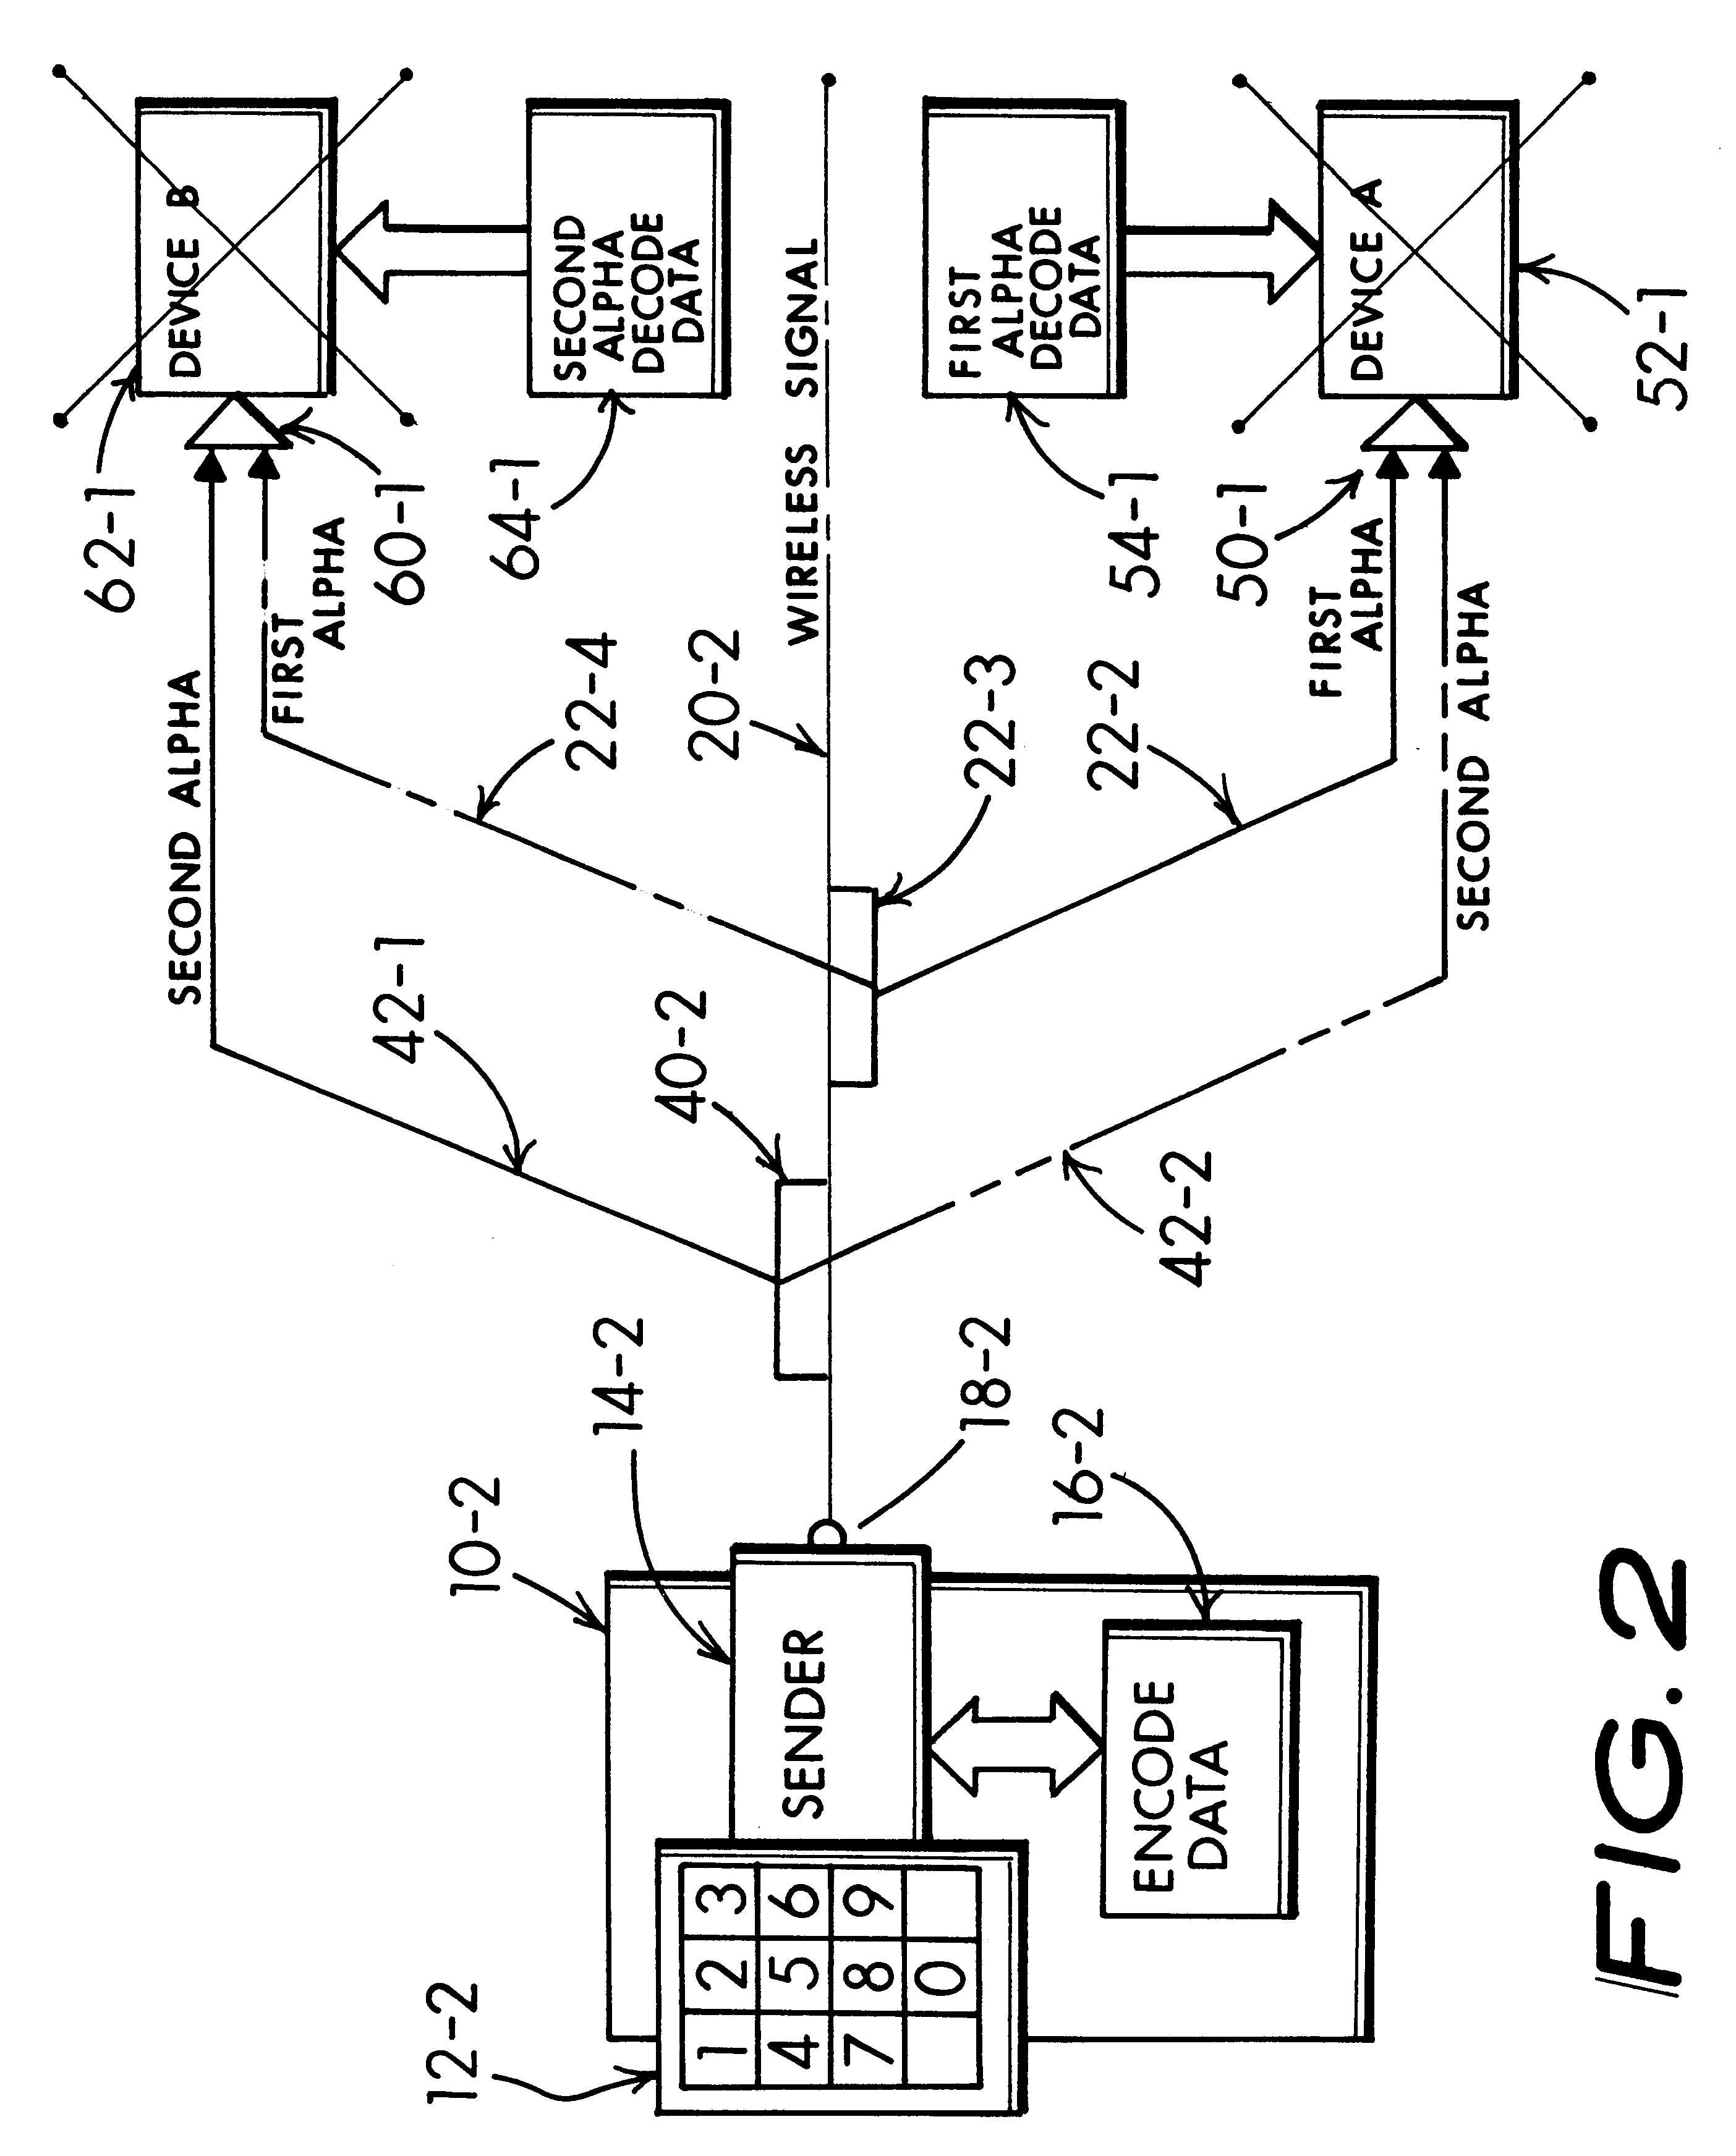 Alternate command signal decoding option for a remotely controlled apparatus